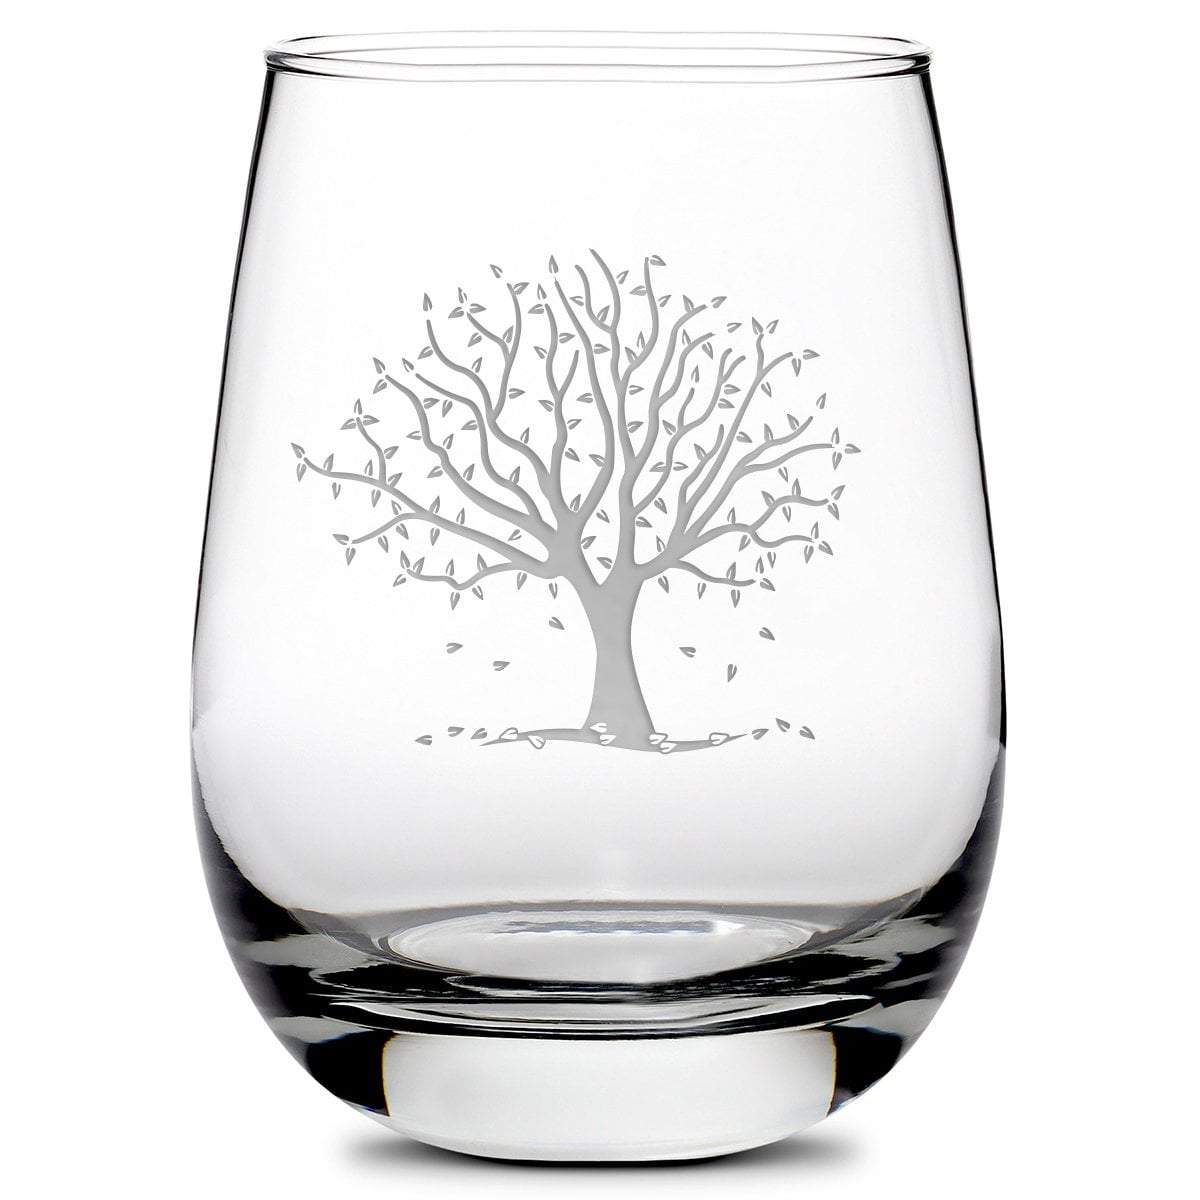 Premium Stemless Wine Glass, Fall Season, Hand Etched, Made in USA, 16oz by Integrity Bottles